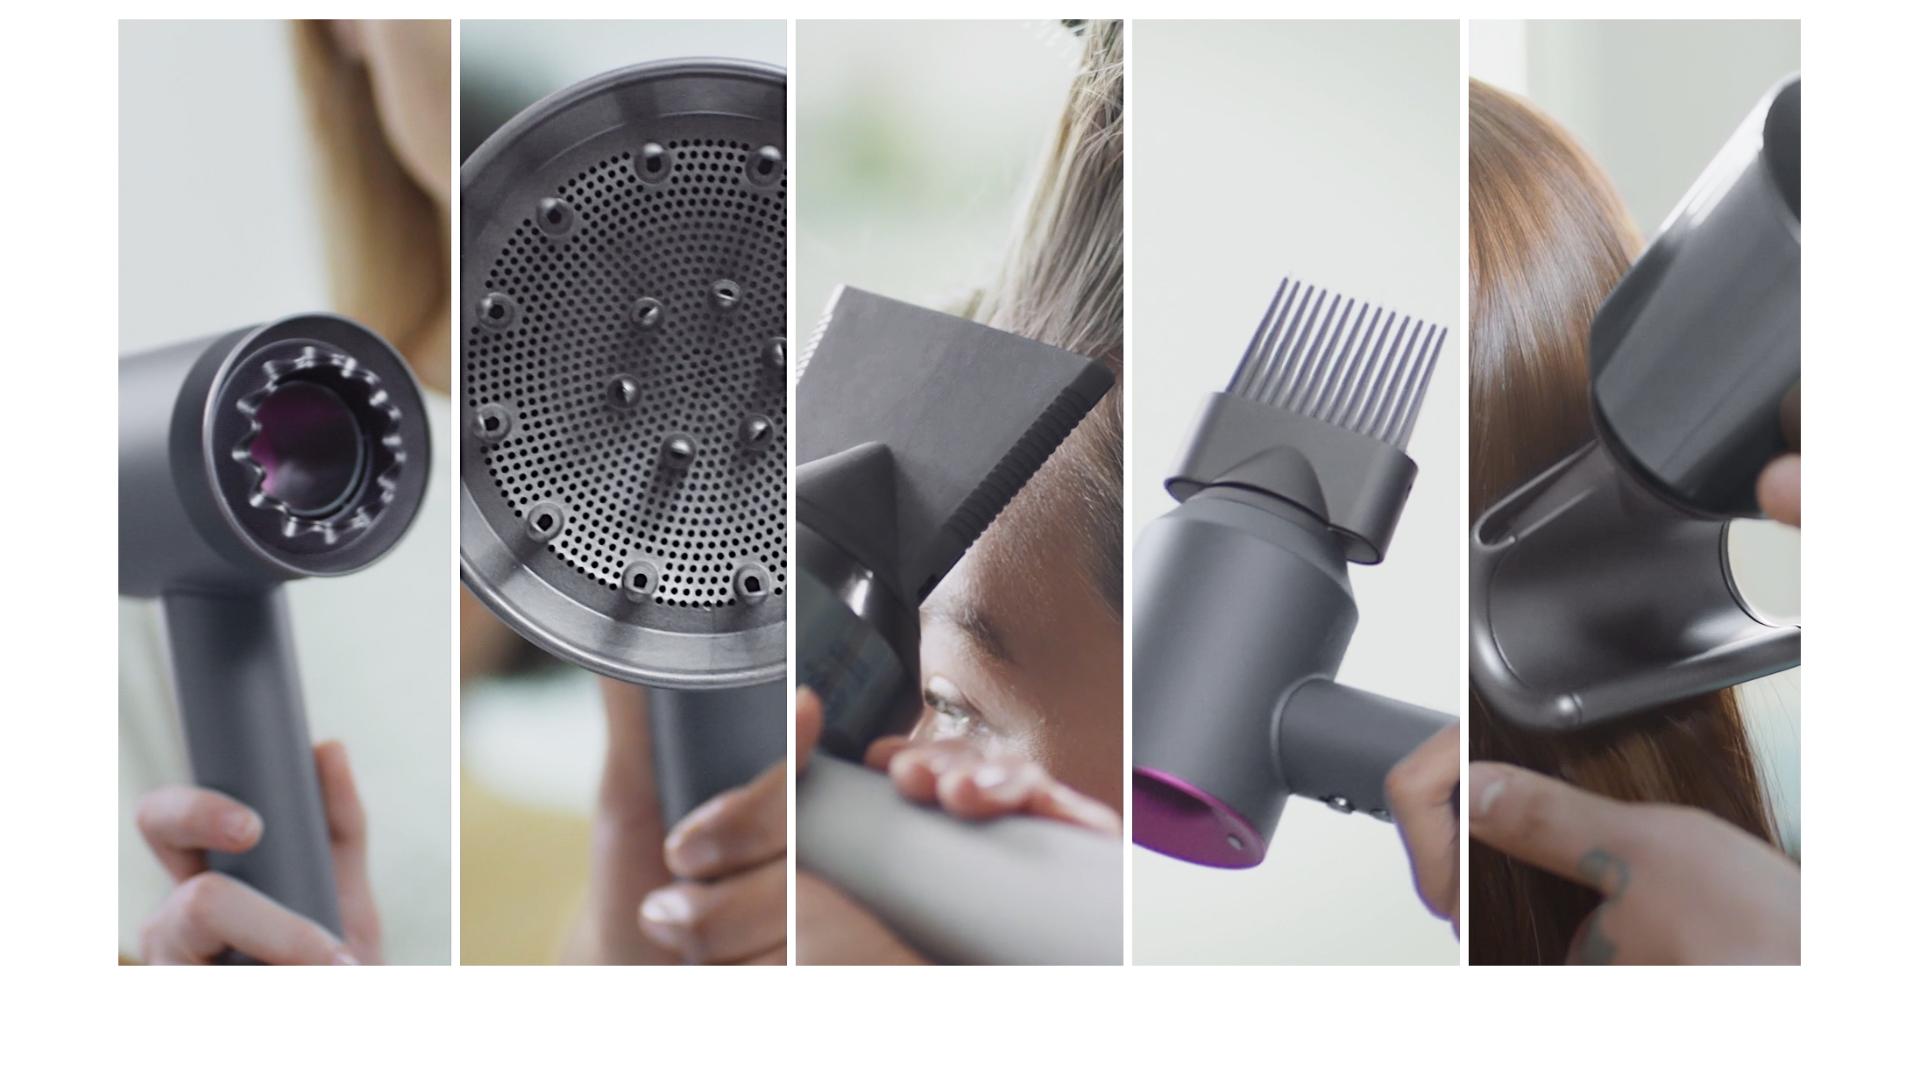 The five styling attachments for the Dyson Supersonic hair dryer